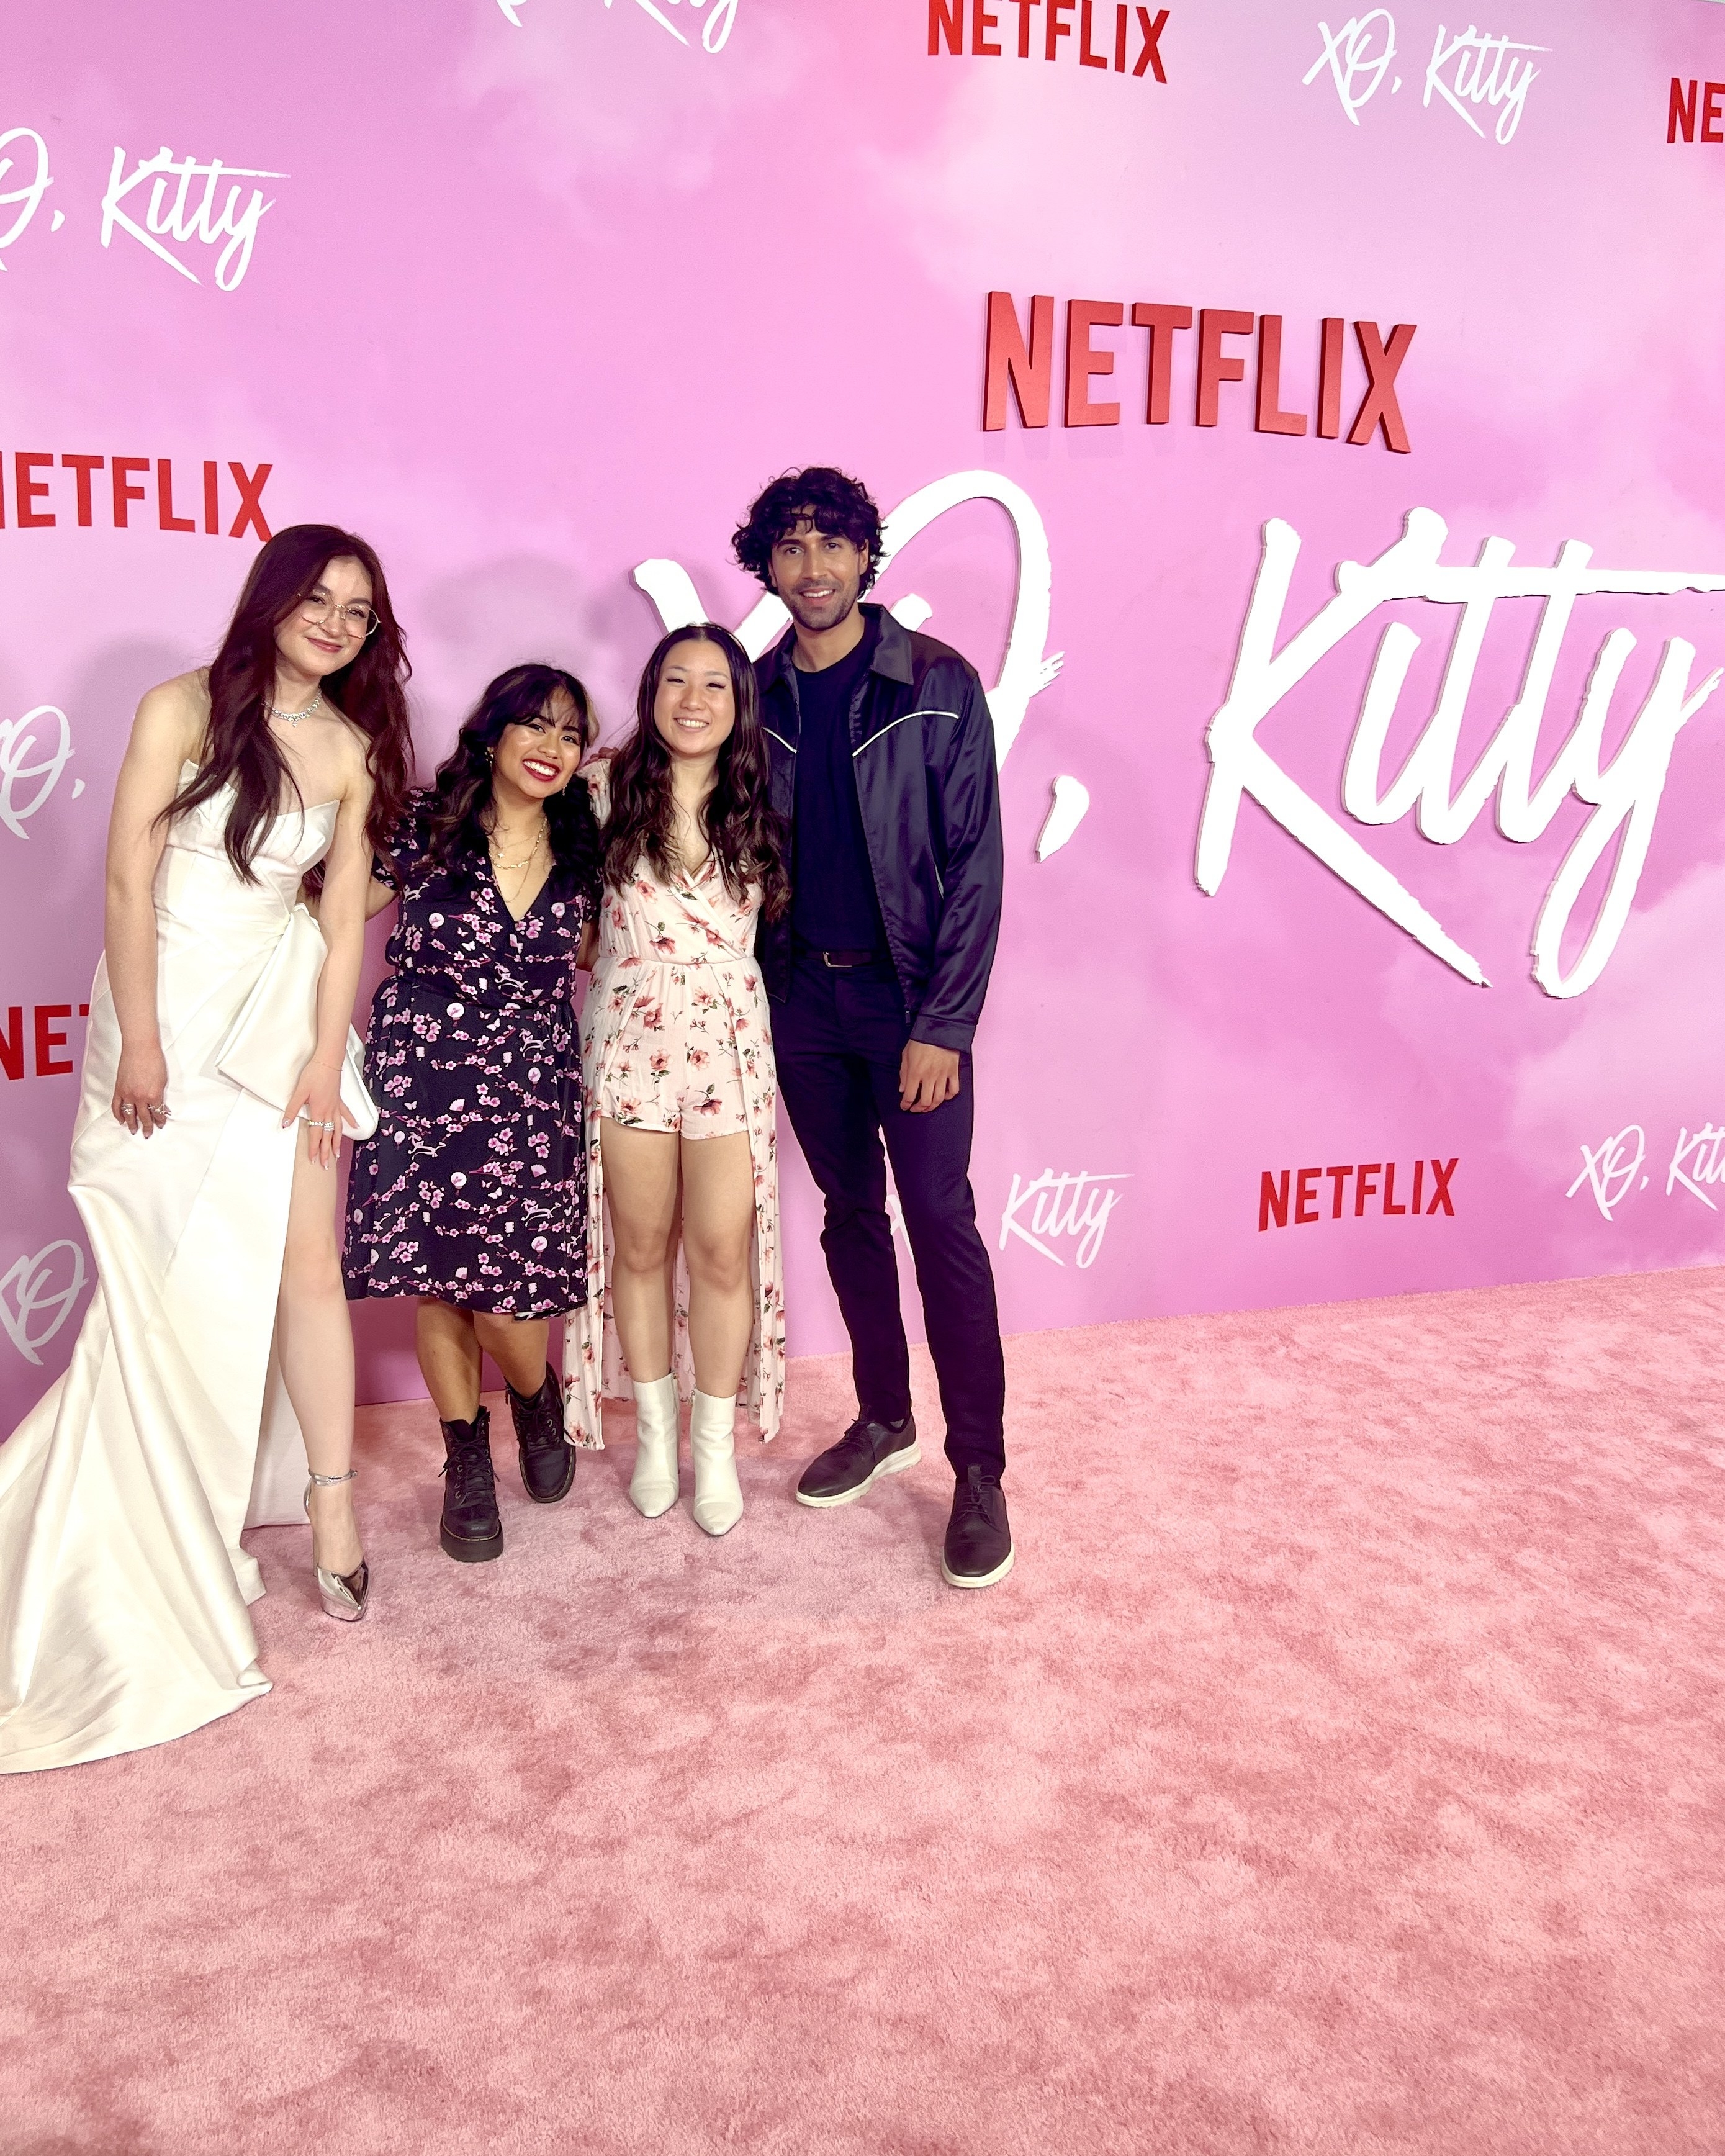 Anna Cathcart, Janna Macatangay, and Rajen Budiyan standing in front of pink XO,  Kitty background and carpet.